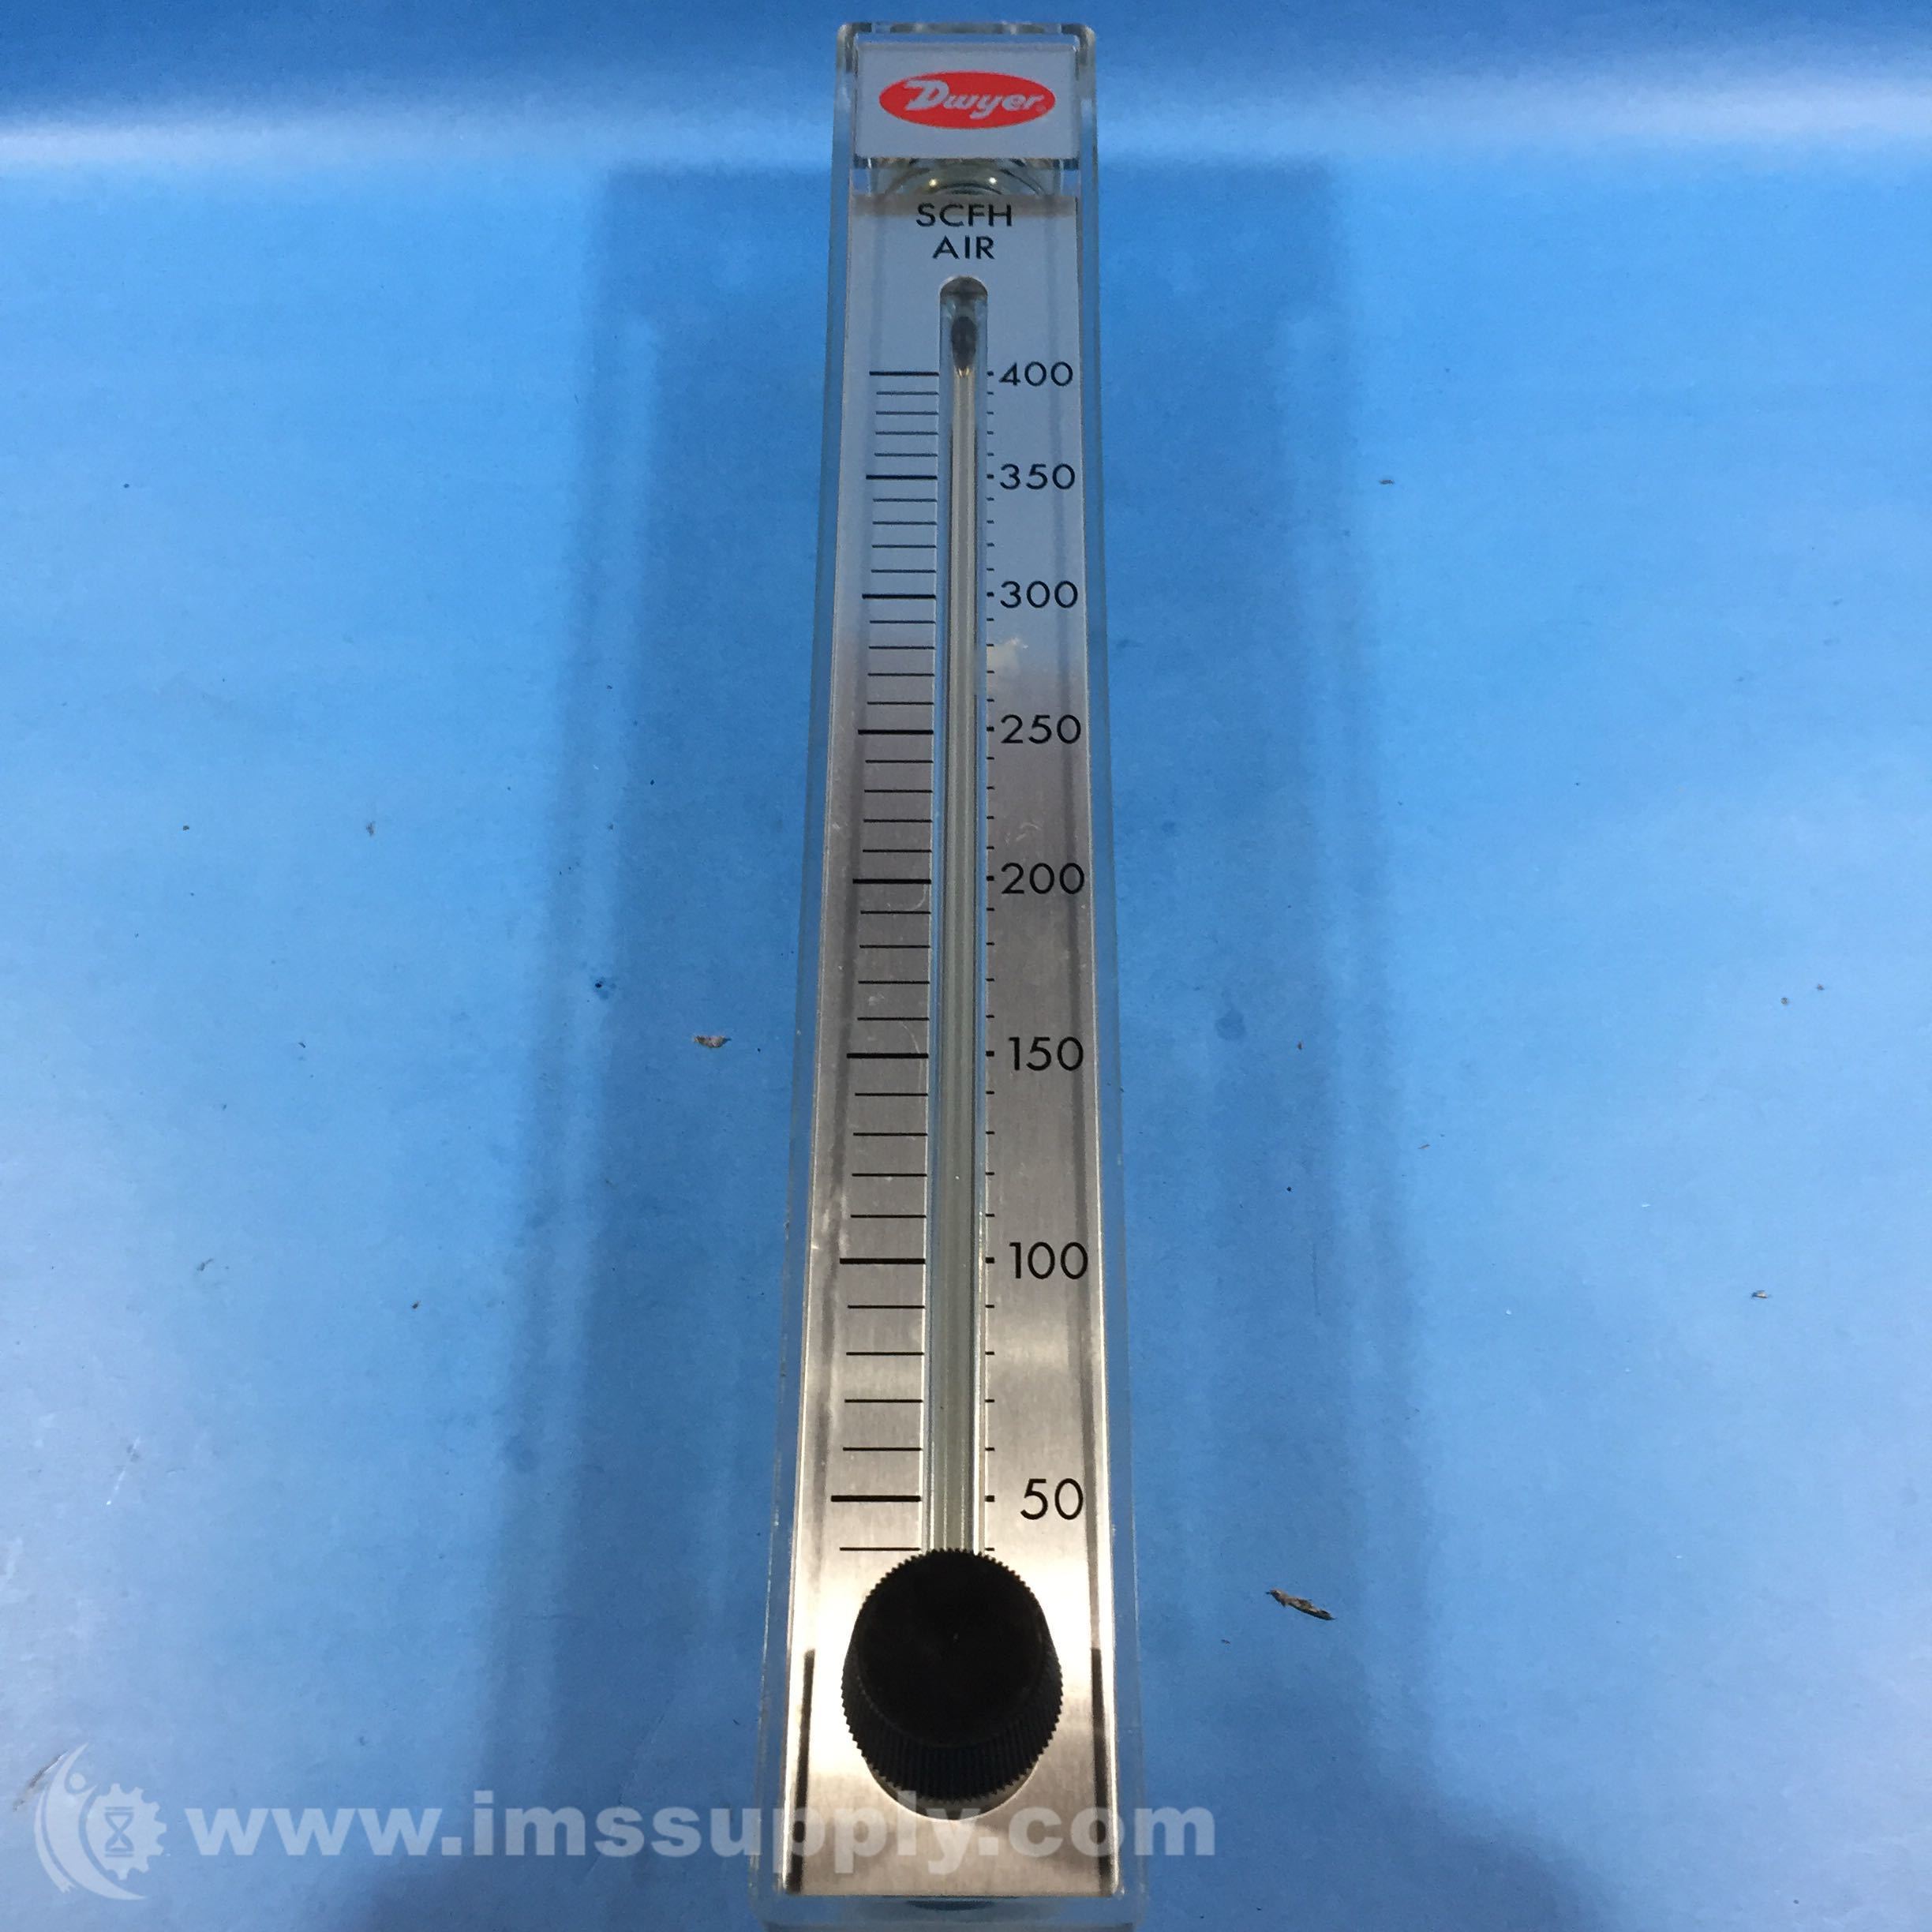 /-3% Accuracy; Stainless Va Scale; Details about   Flowmeter; Model RMB; 40-400 SCFH Air; 5-in 